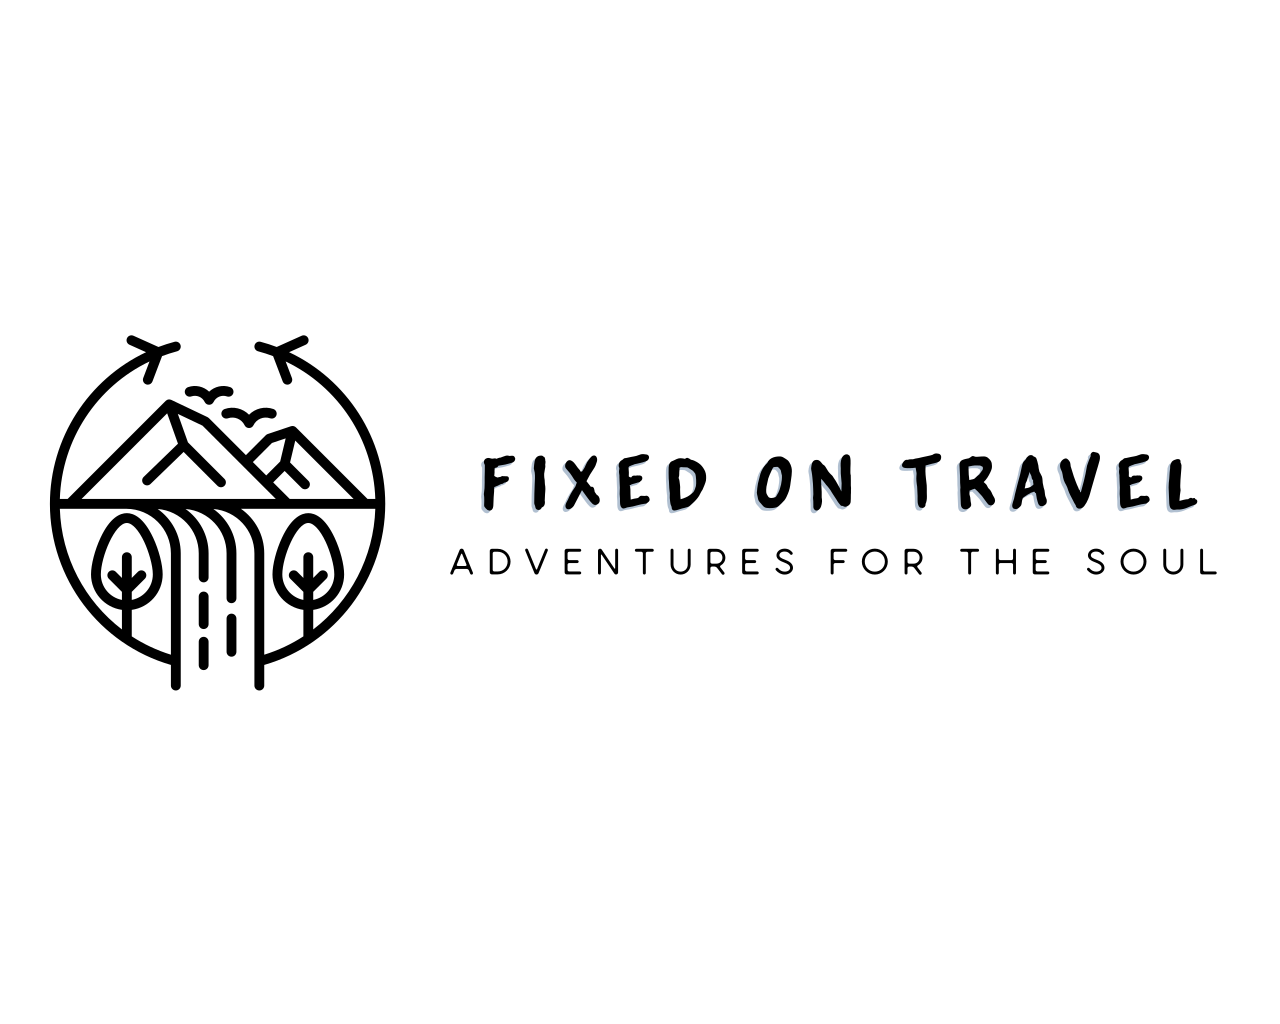 Fixed on Travel